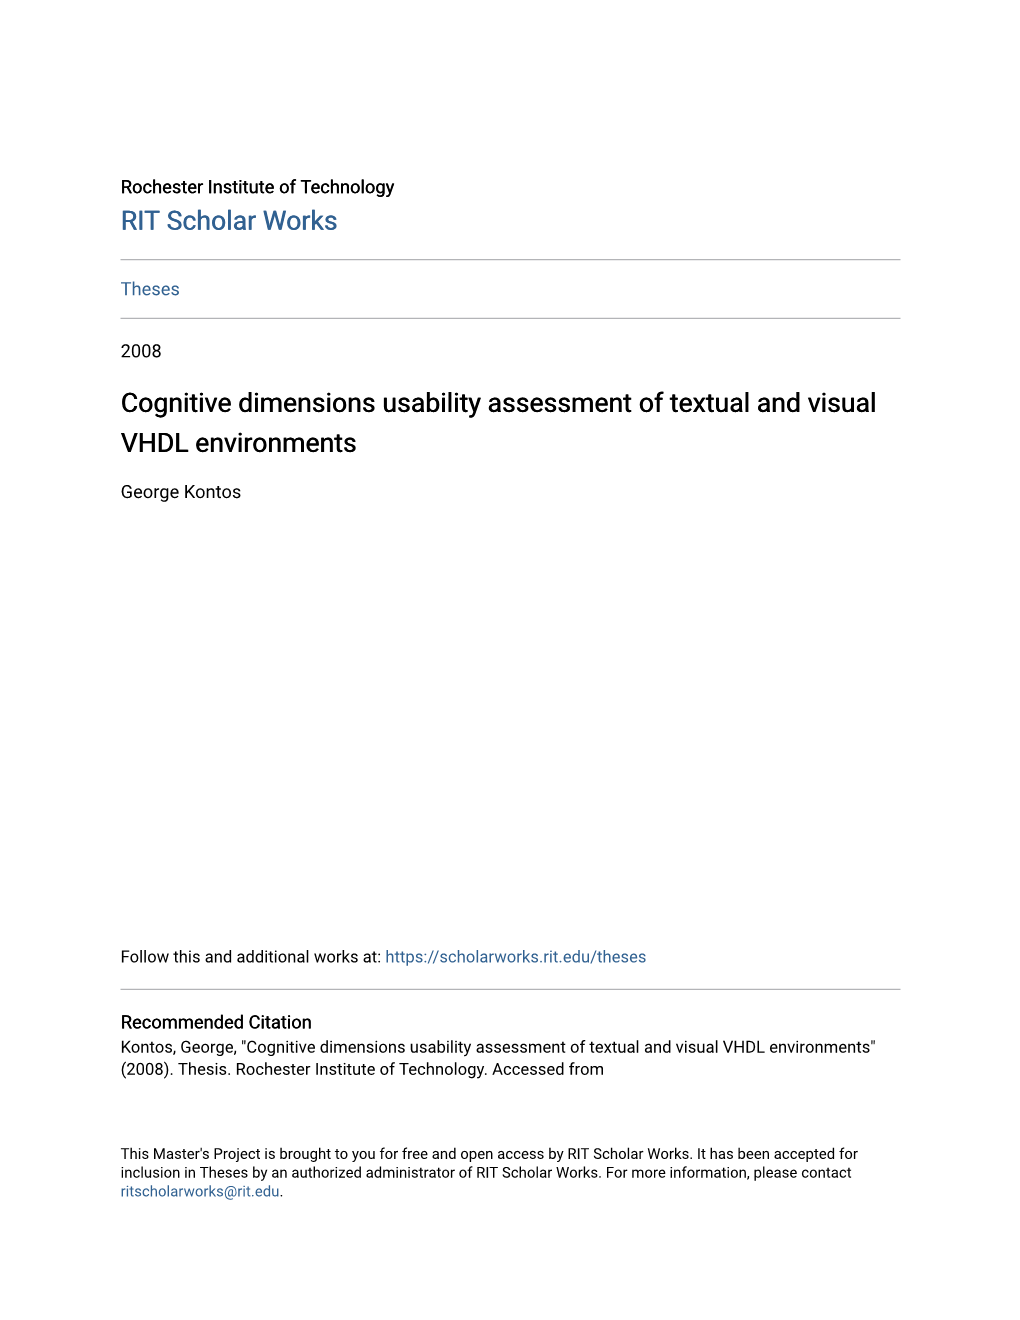 Cognitive Dimensions Usability Assessment of Textual and Visual VHDL Environments